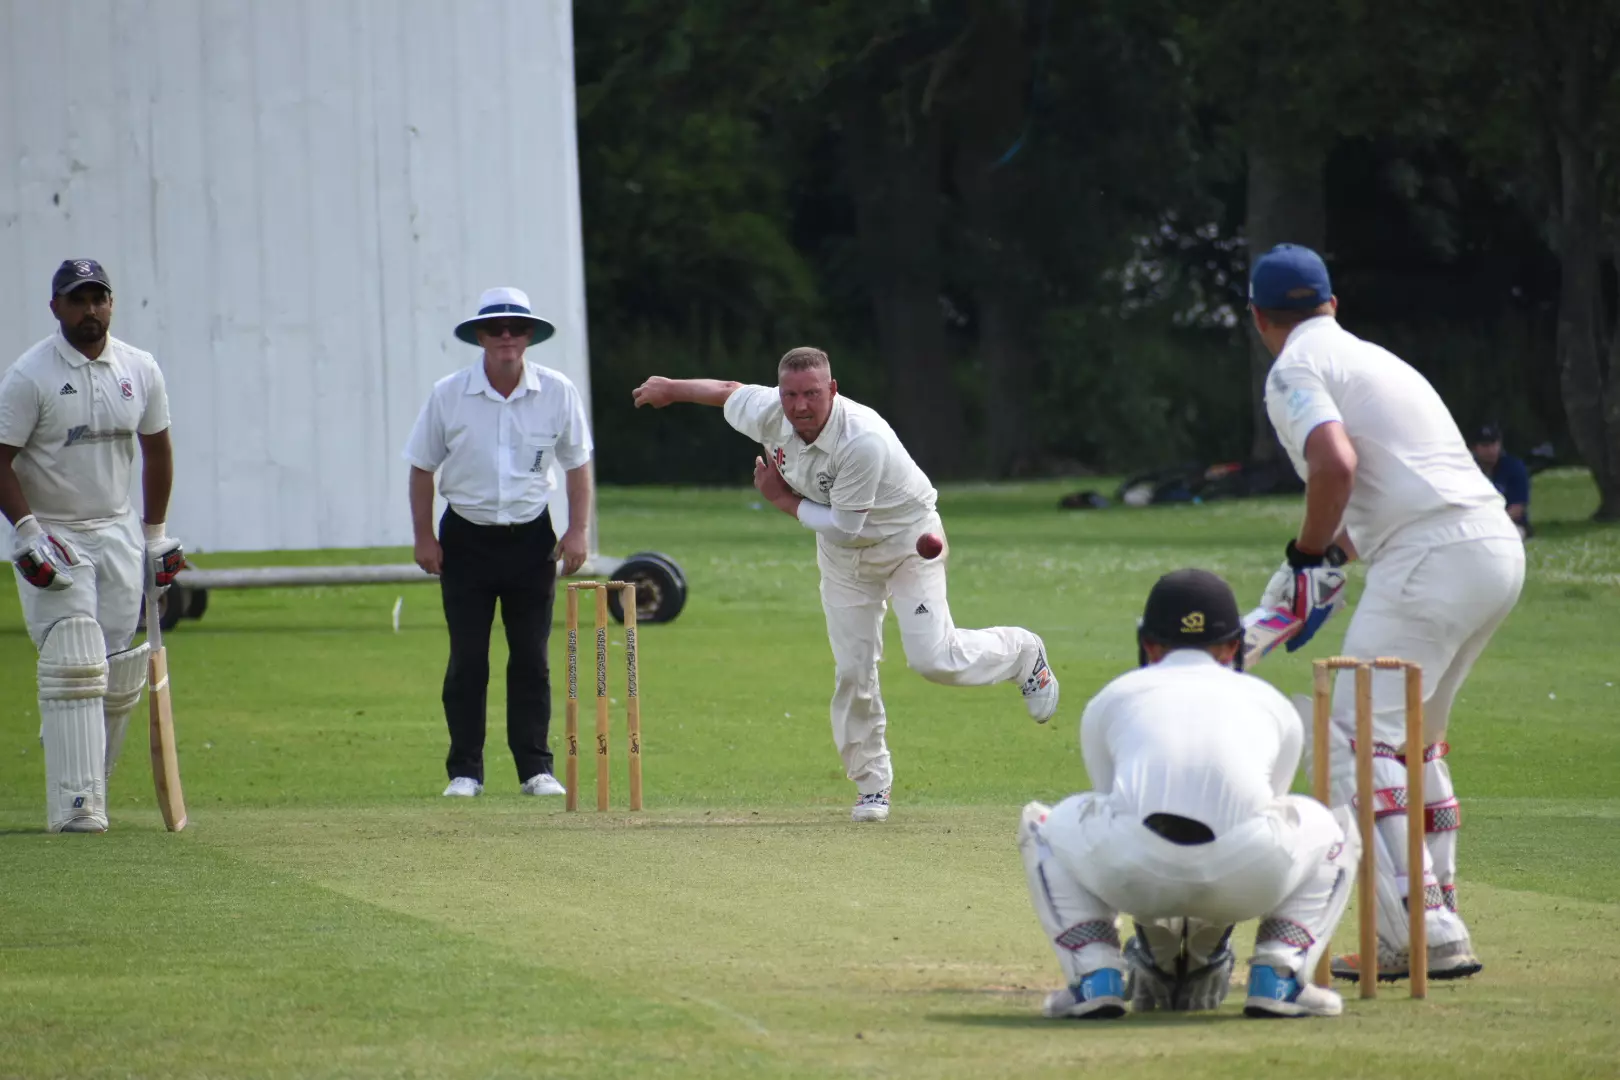 Daring Skelmanthorpe Outmuscled By On-Fire Moorlands - Sykes Cup Semi-Final Review